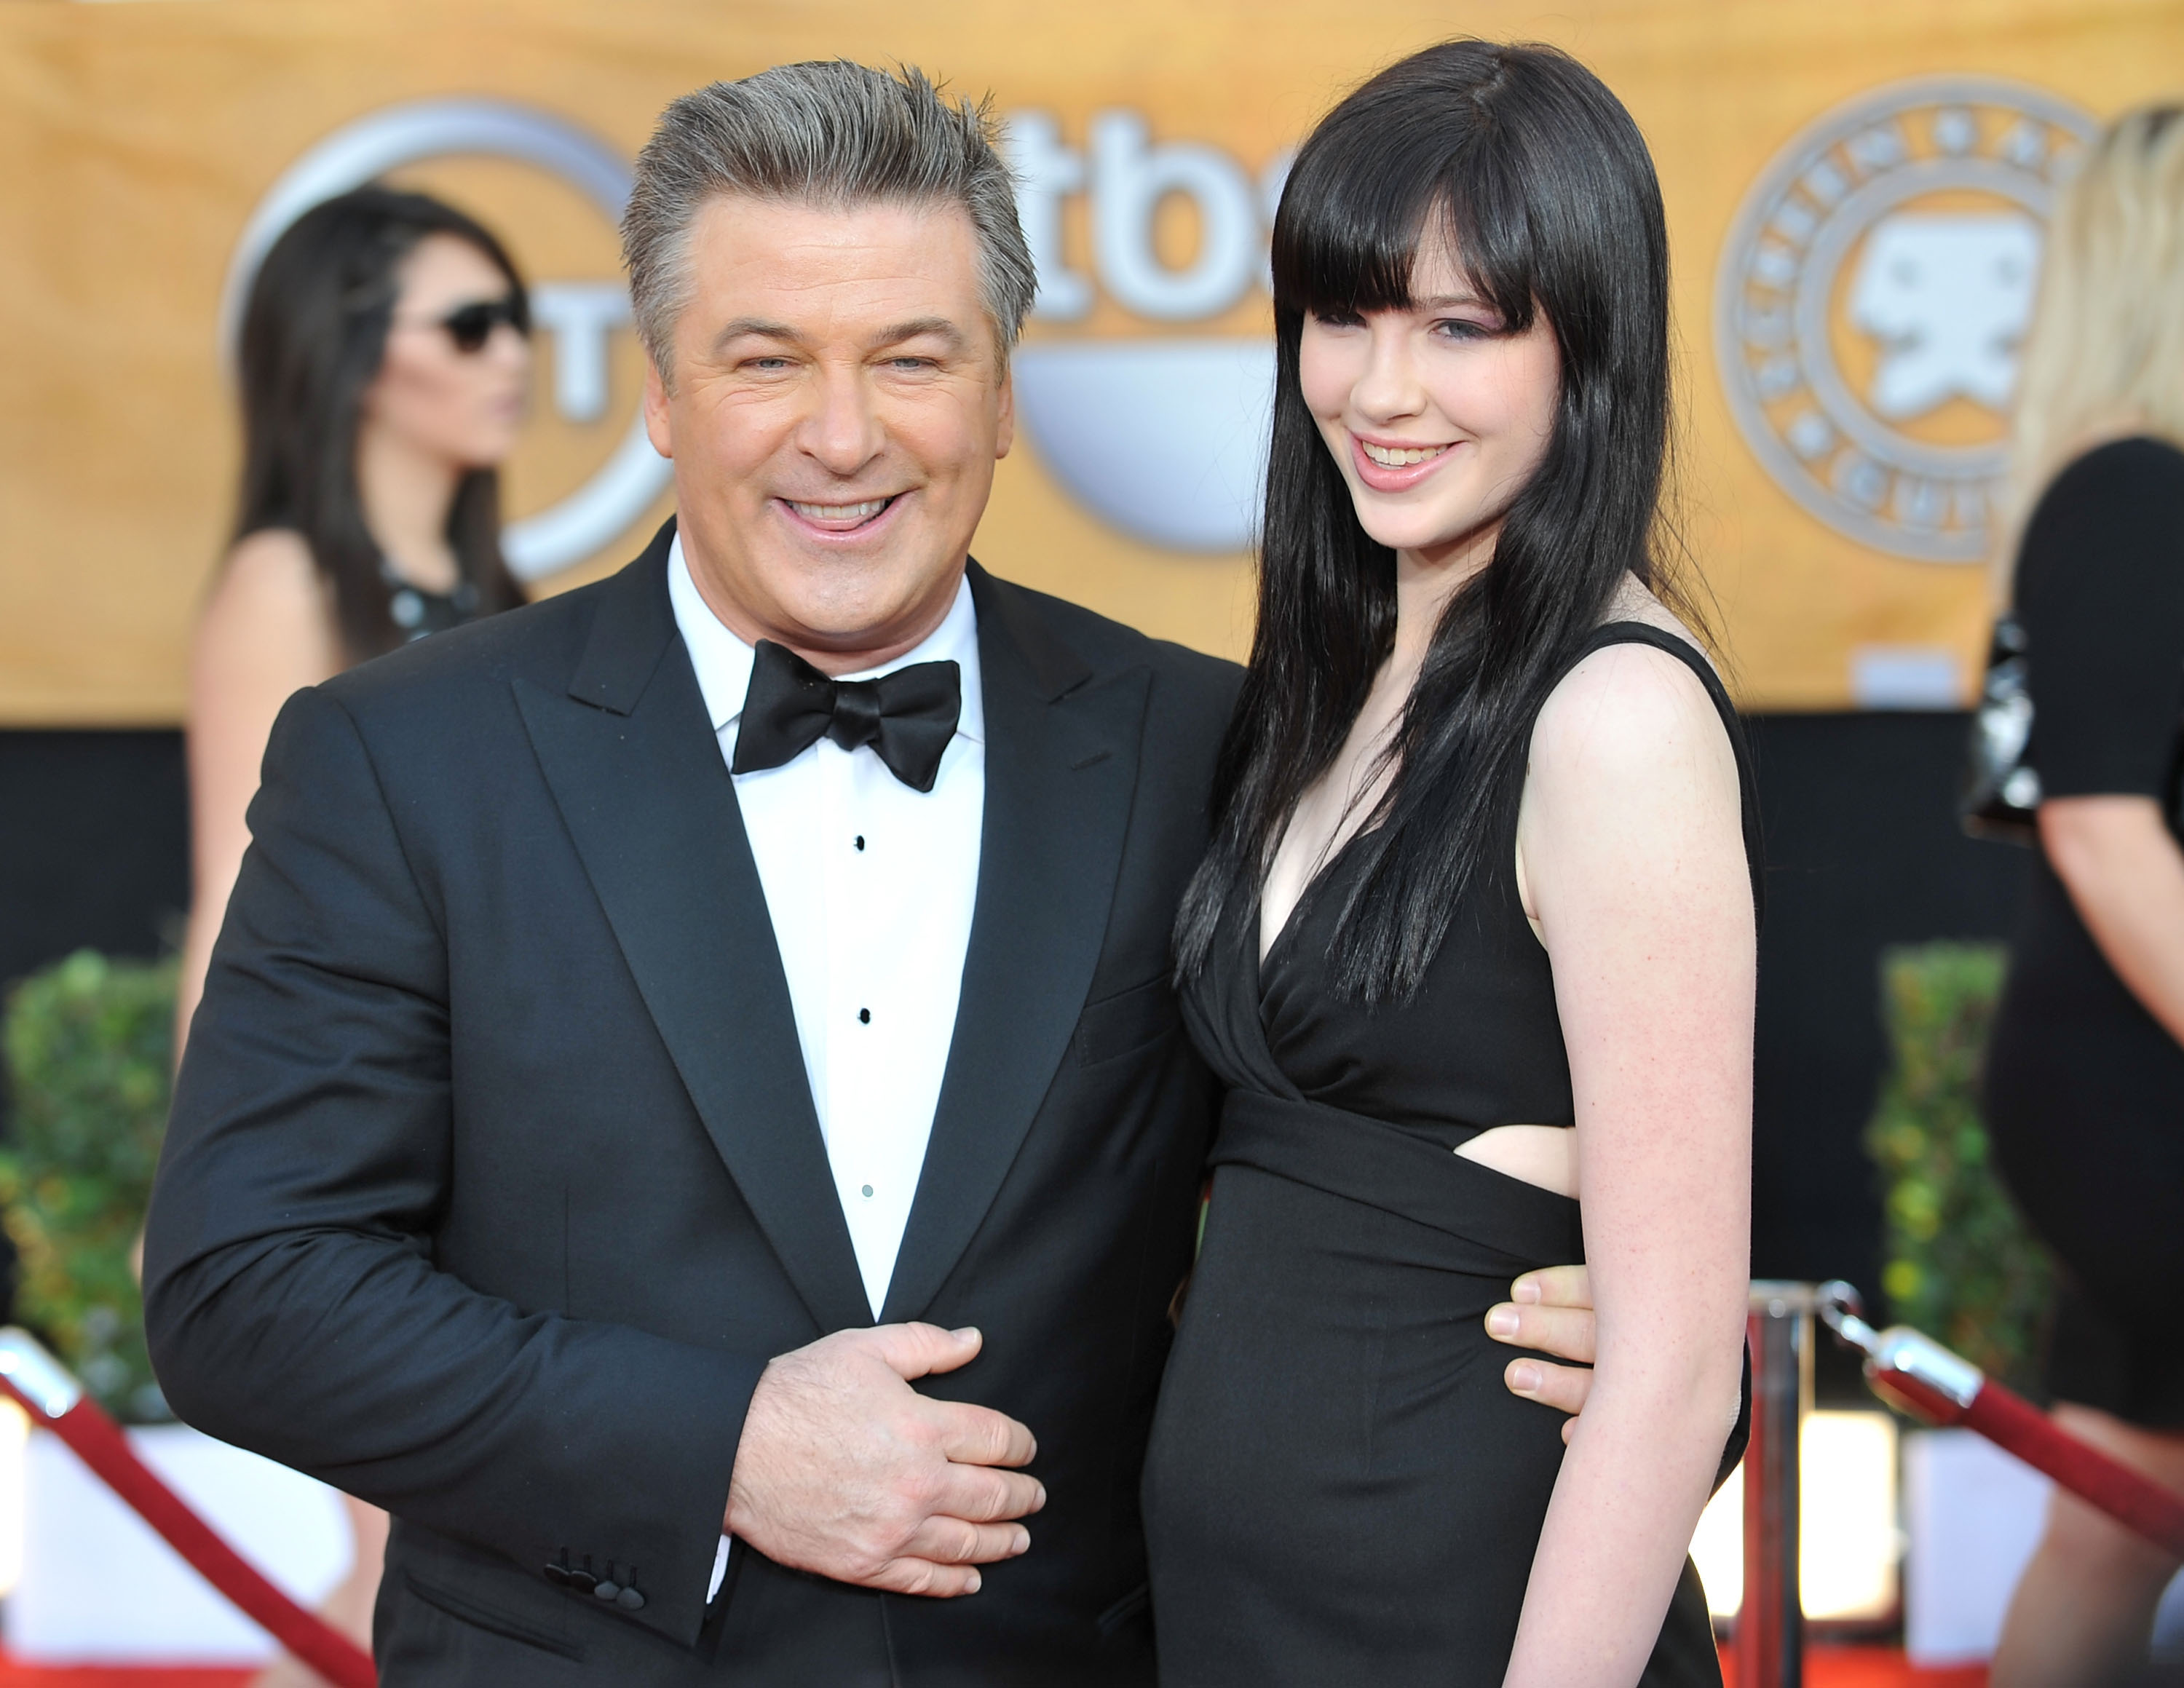 Actor Alec Baldwin and daughter Ireland arrive at the 15th Annual Screen Actors Guild Awards held at the Shrine Auditorium on January 25, 2009 in Los Angeles, California. | Source: Getty Images